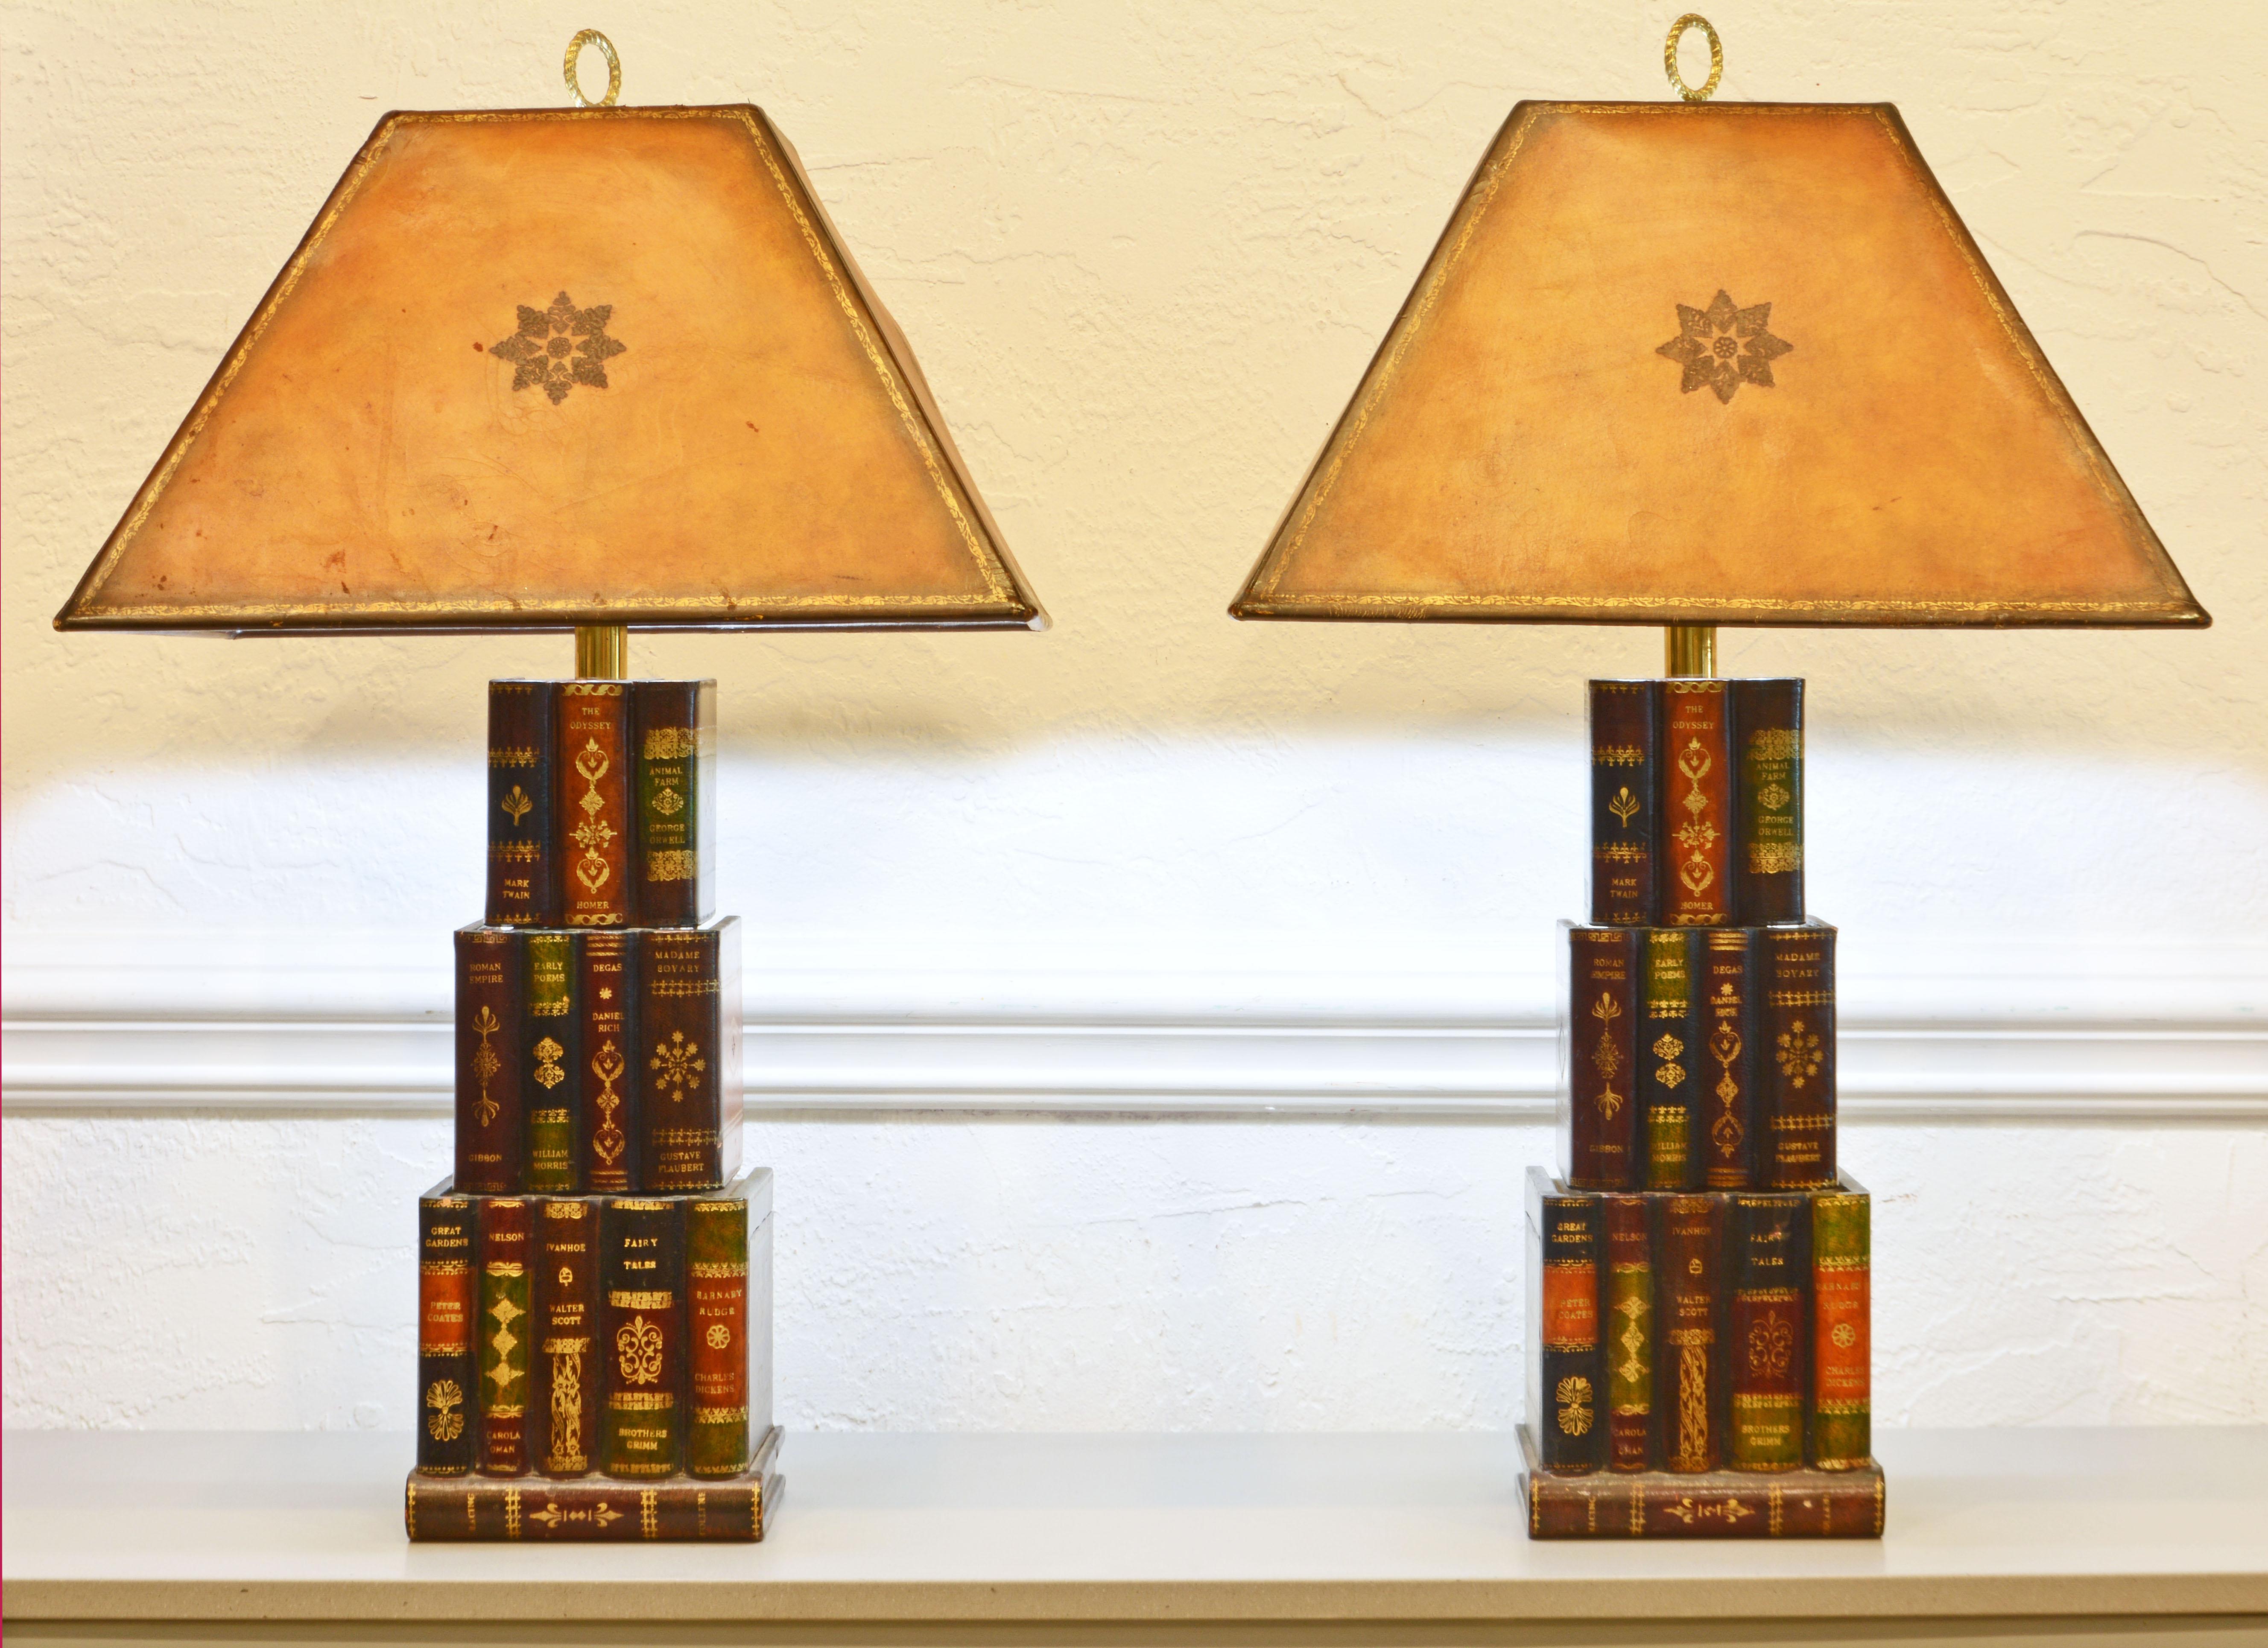 This pair of original Maitland Smith three level book lamps are retaining their original gilt tooled leather shades. The structure of the lamps are carved in wood and covered in gilt decorated leather simulating stacks of real books. Every book has